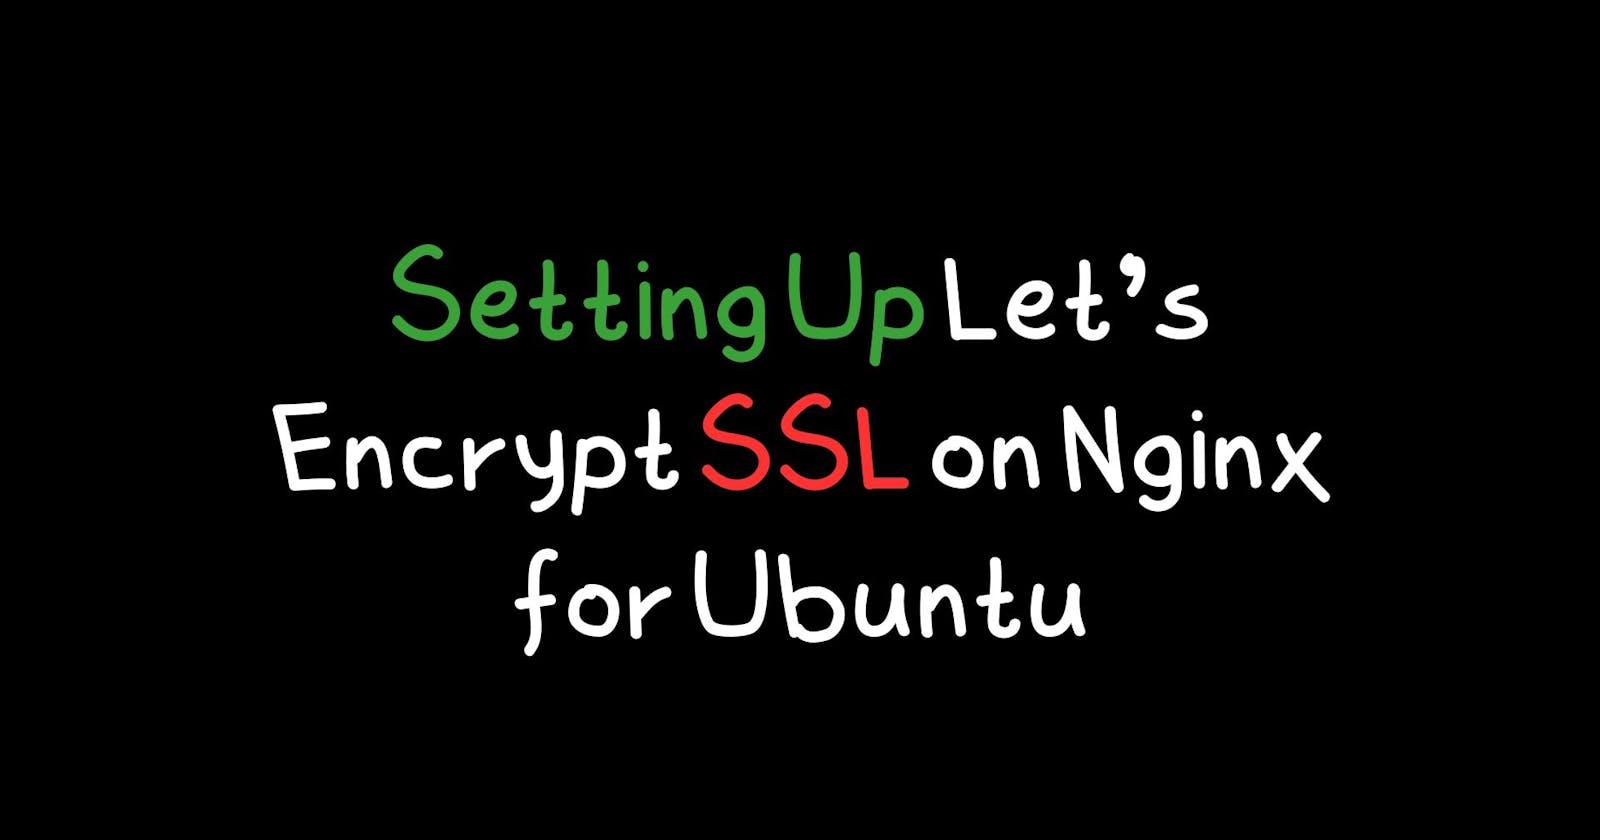 Step-by-Step Guide to Setting Up Let's Encrypt SSL on Nginx for Ubuntu